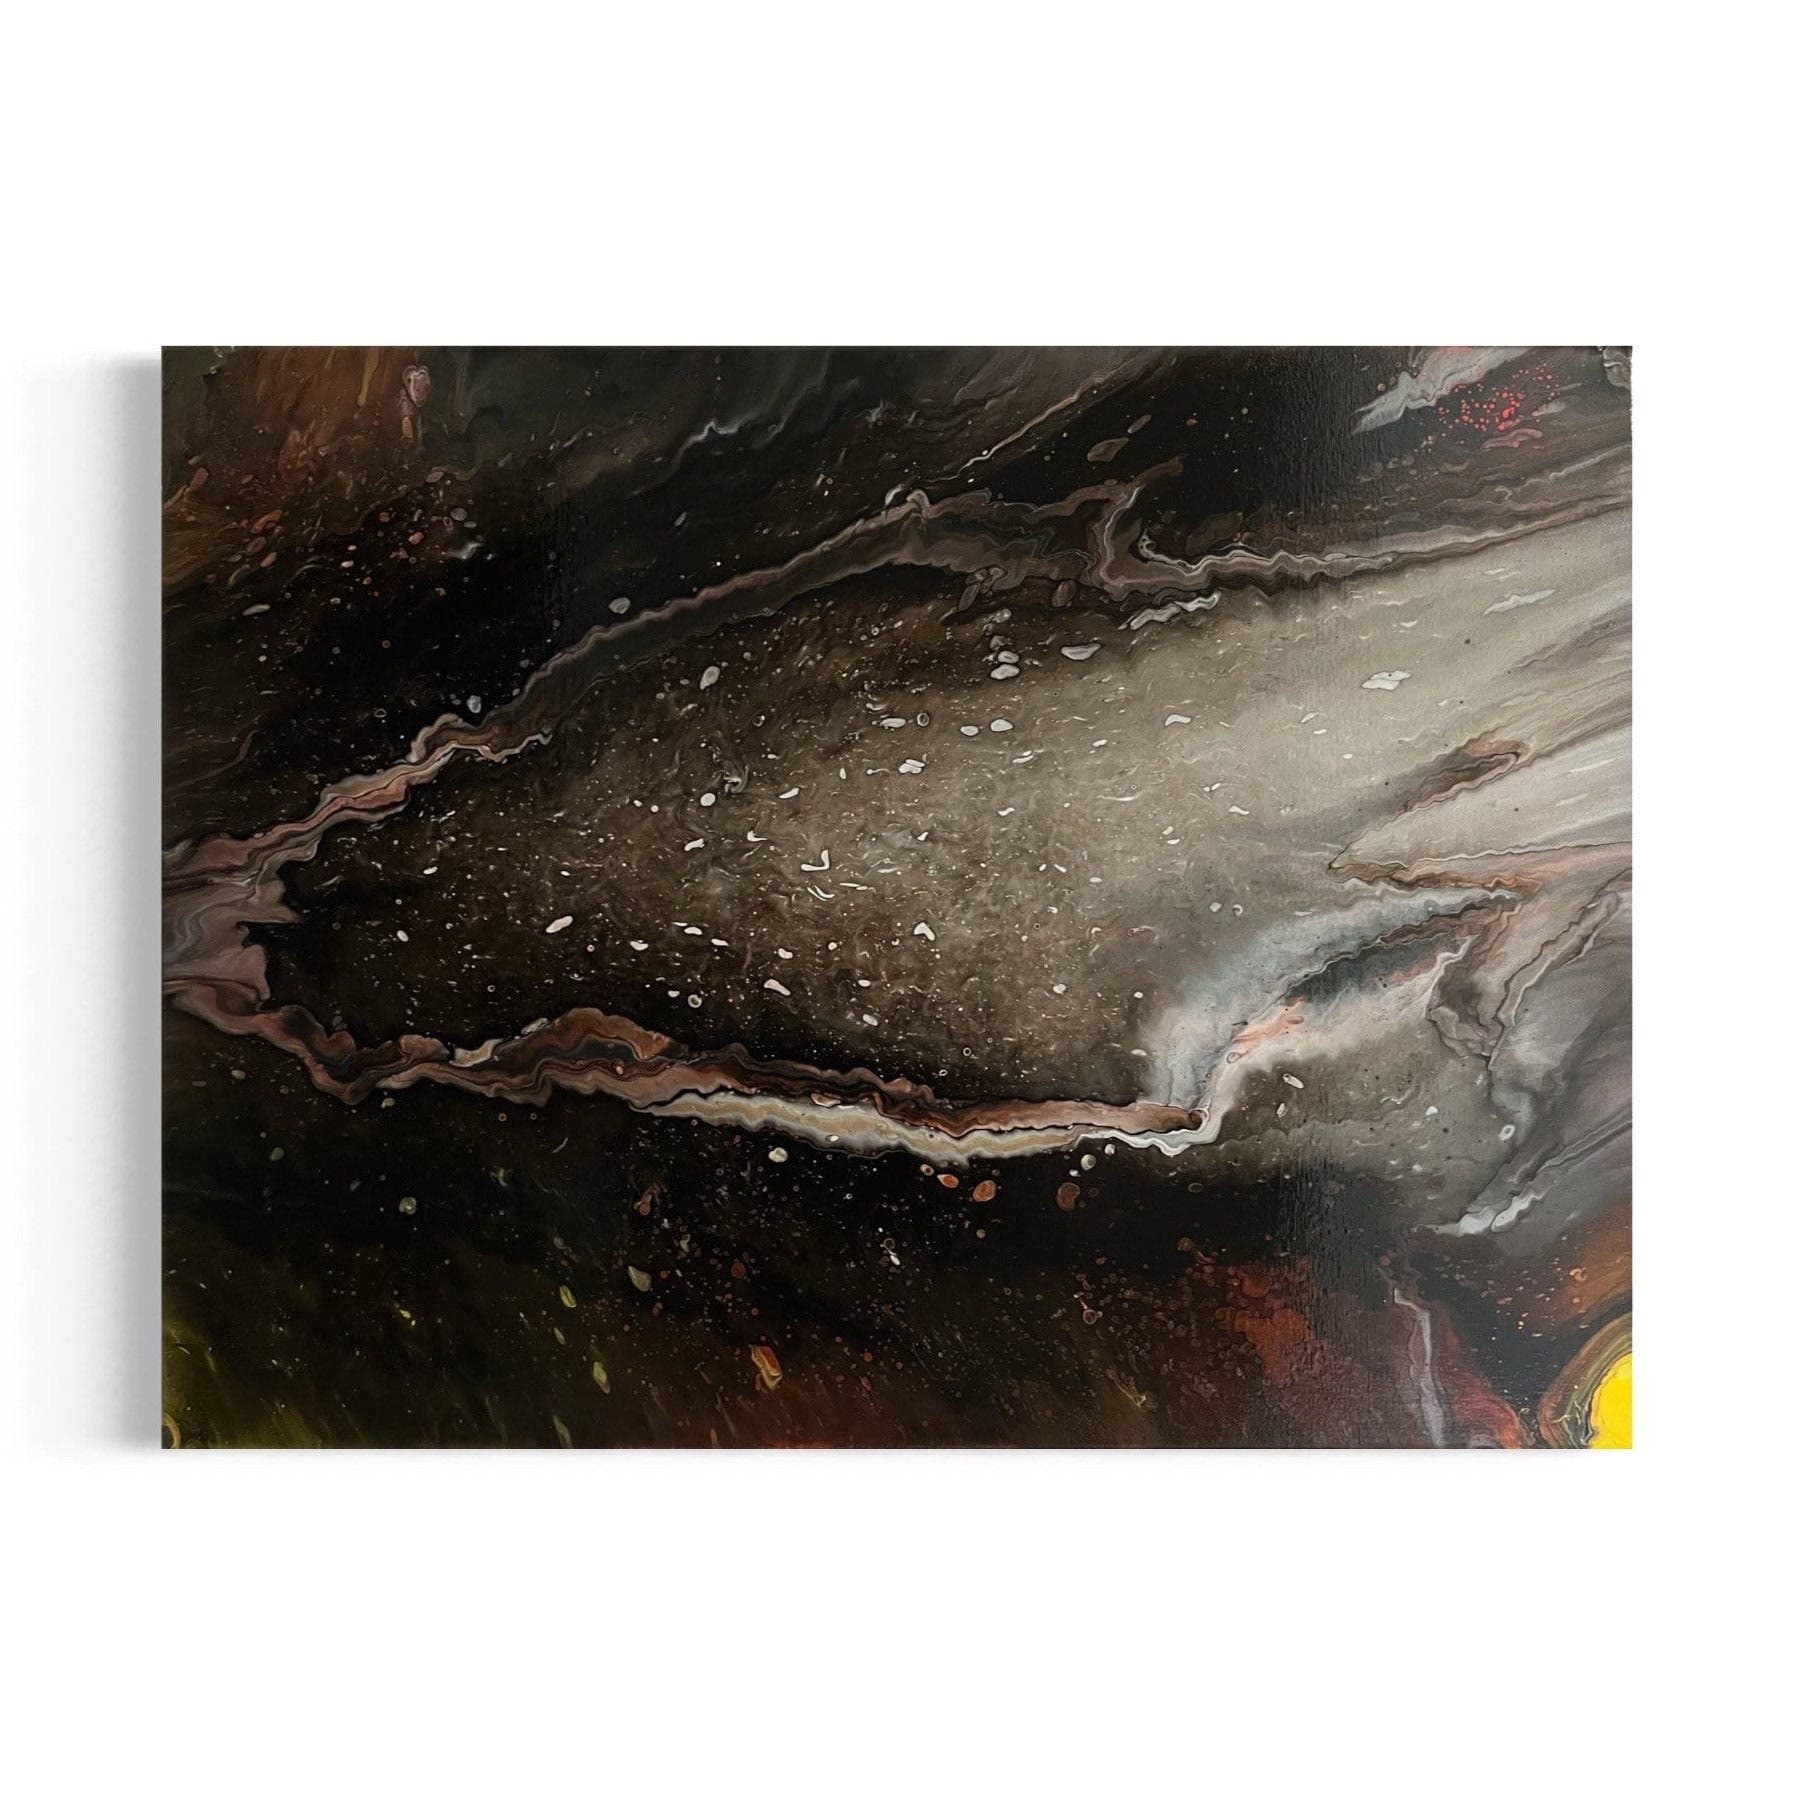 Large Cosmic Comet Pour Wall Art on Stretched Canvas Original Abstract Acrylic Painting Home Décor 24x18 by Sydney Smith